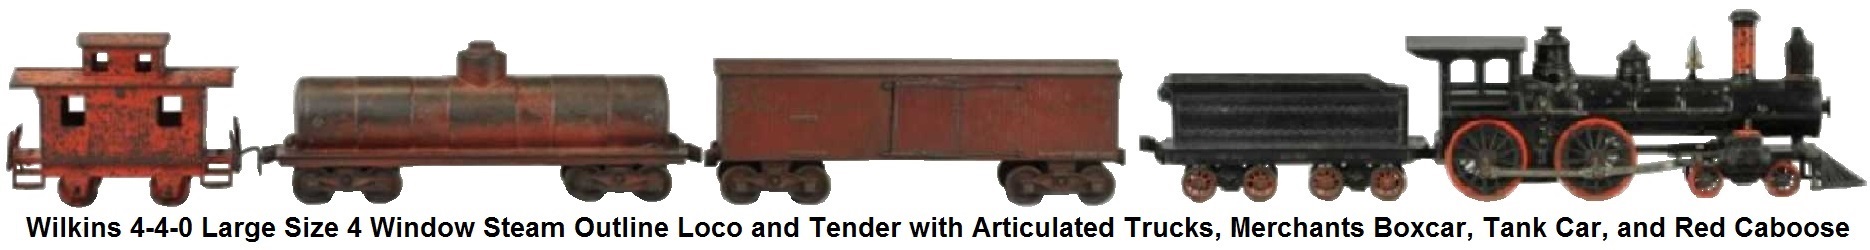 Wilkens 4-4-0 large size four window cab and tender with articulated trucks together with, tank car, merchants box car and red caboose